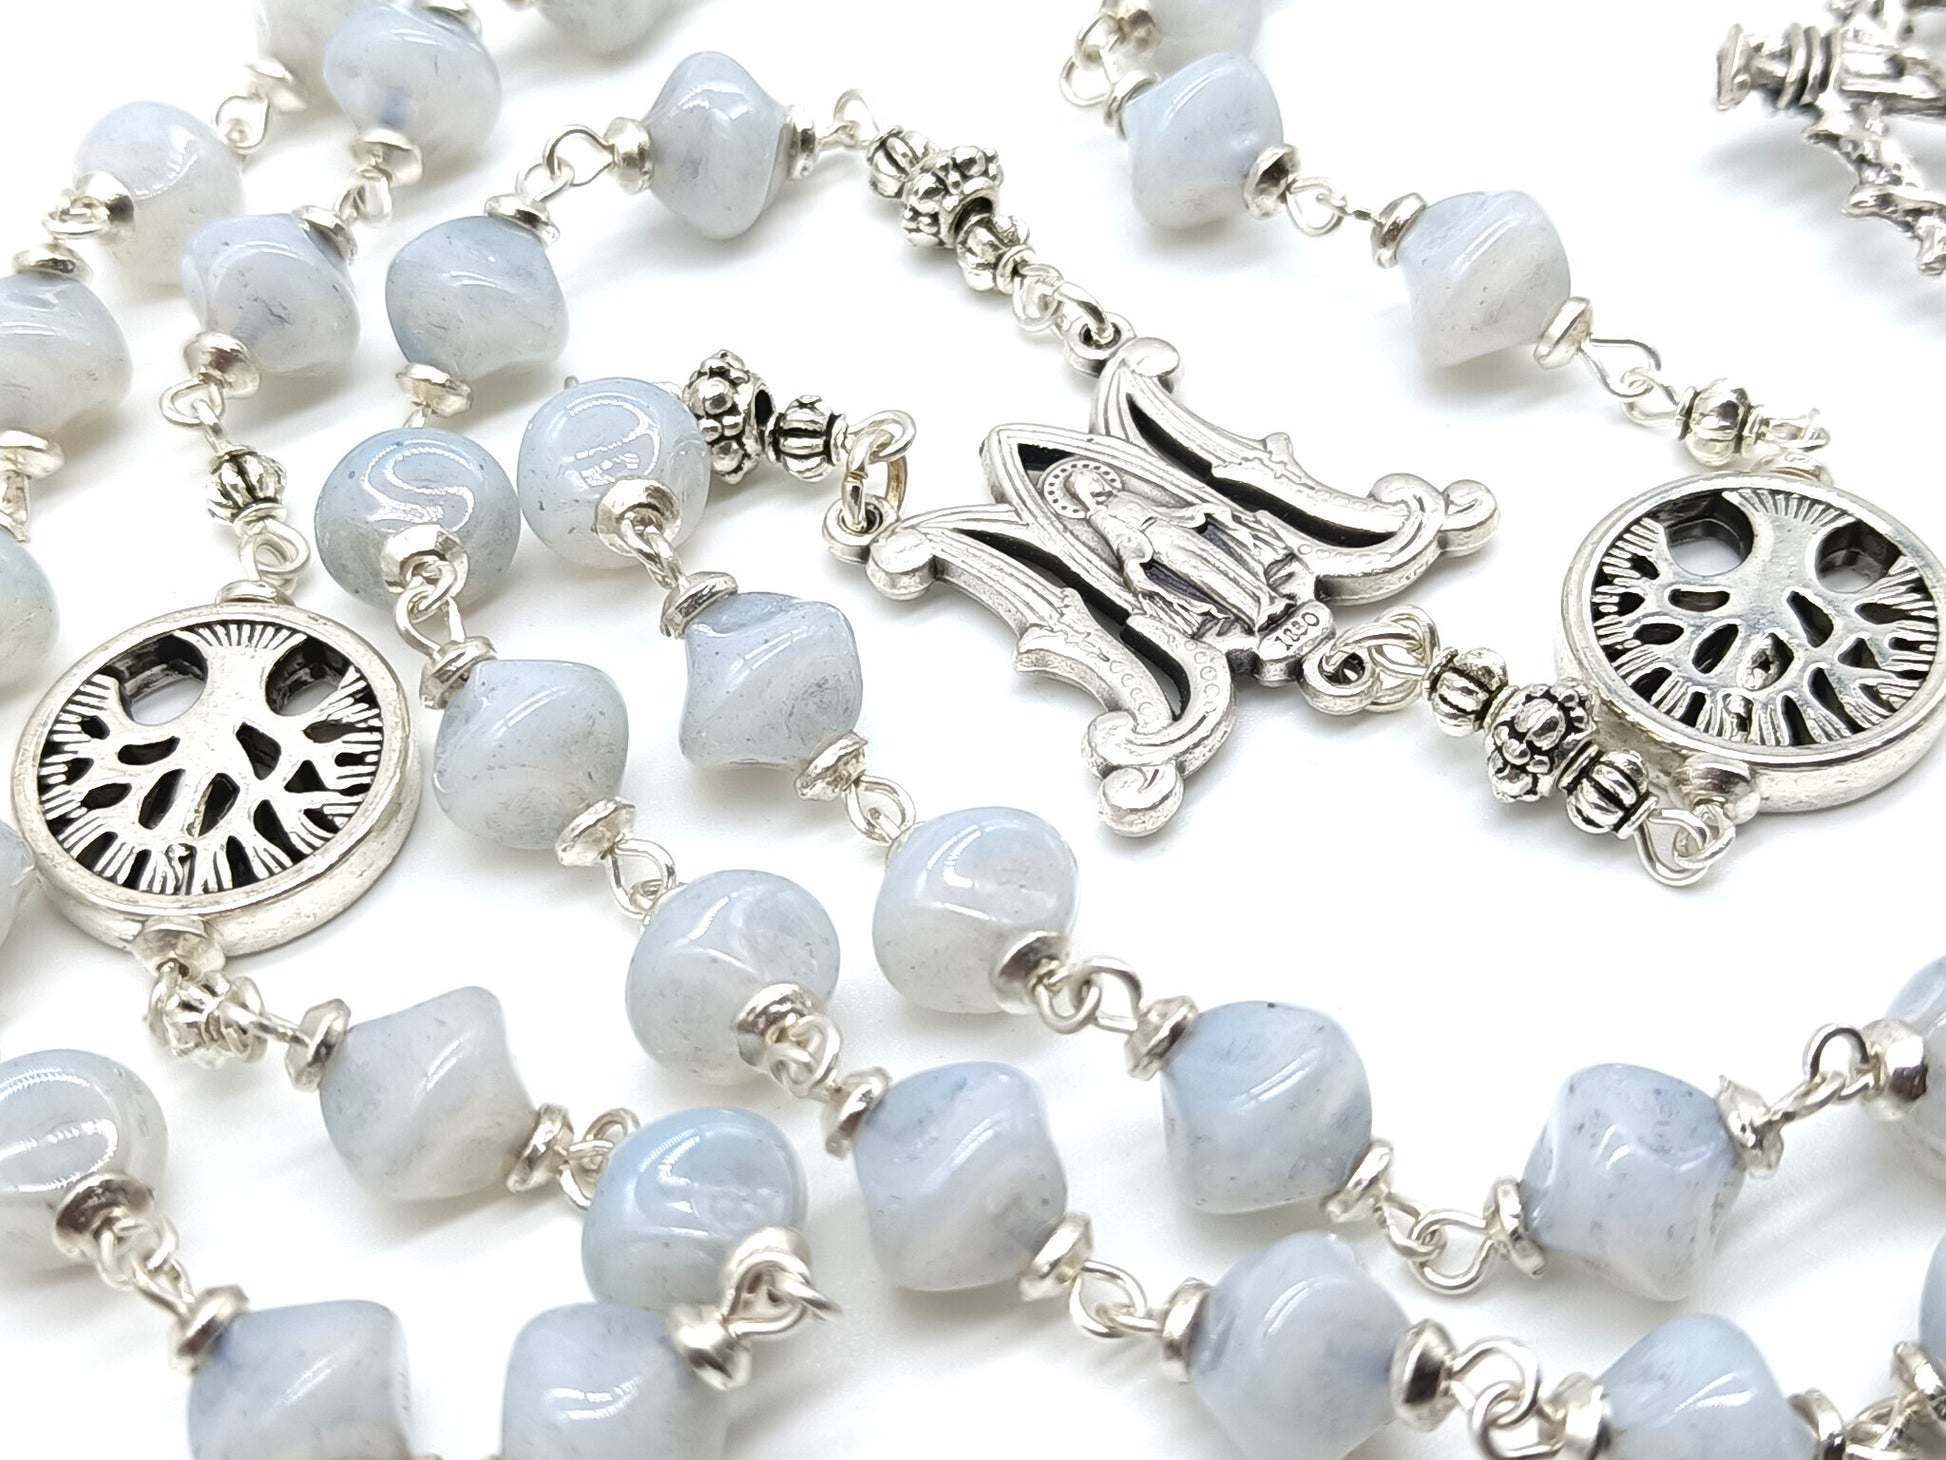 Tree of life rosary beads with white lamp glass and silver crucifix and miraculous medal centre.